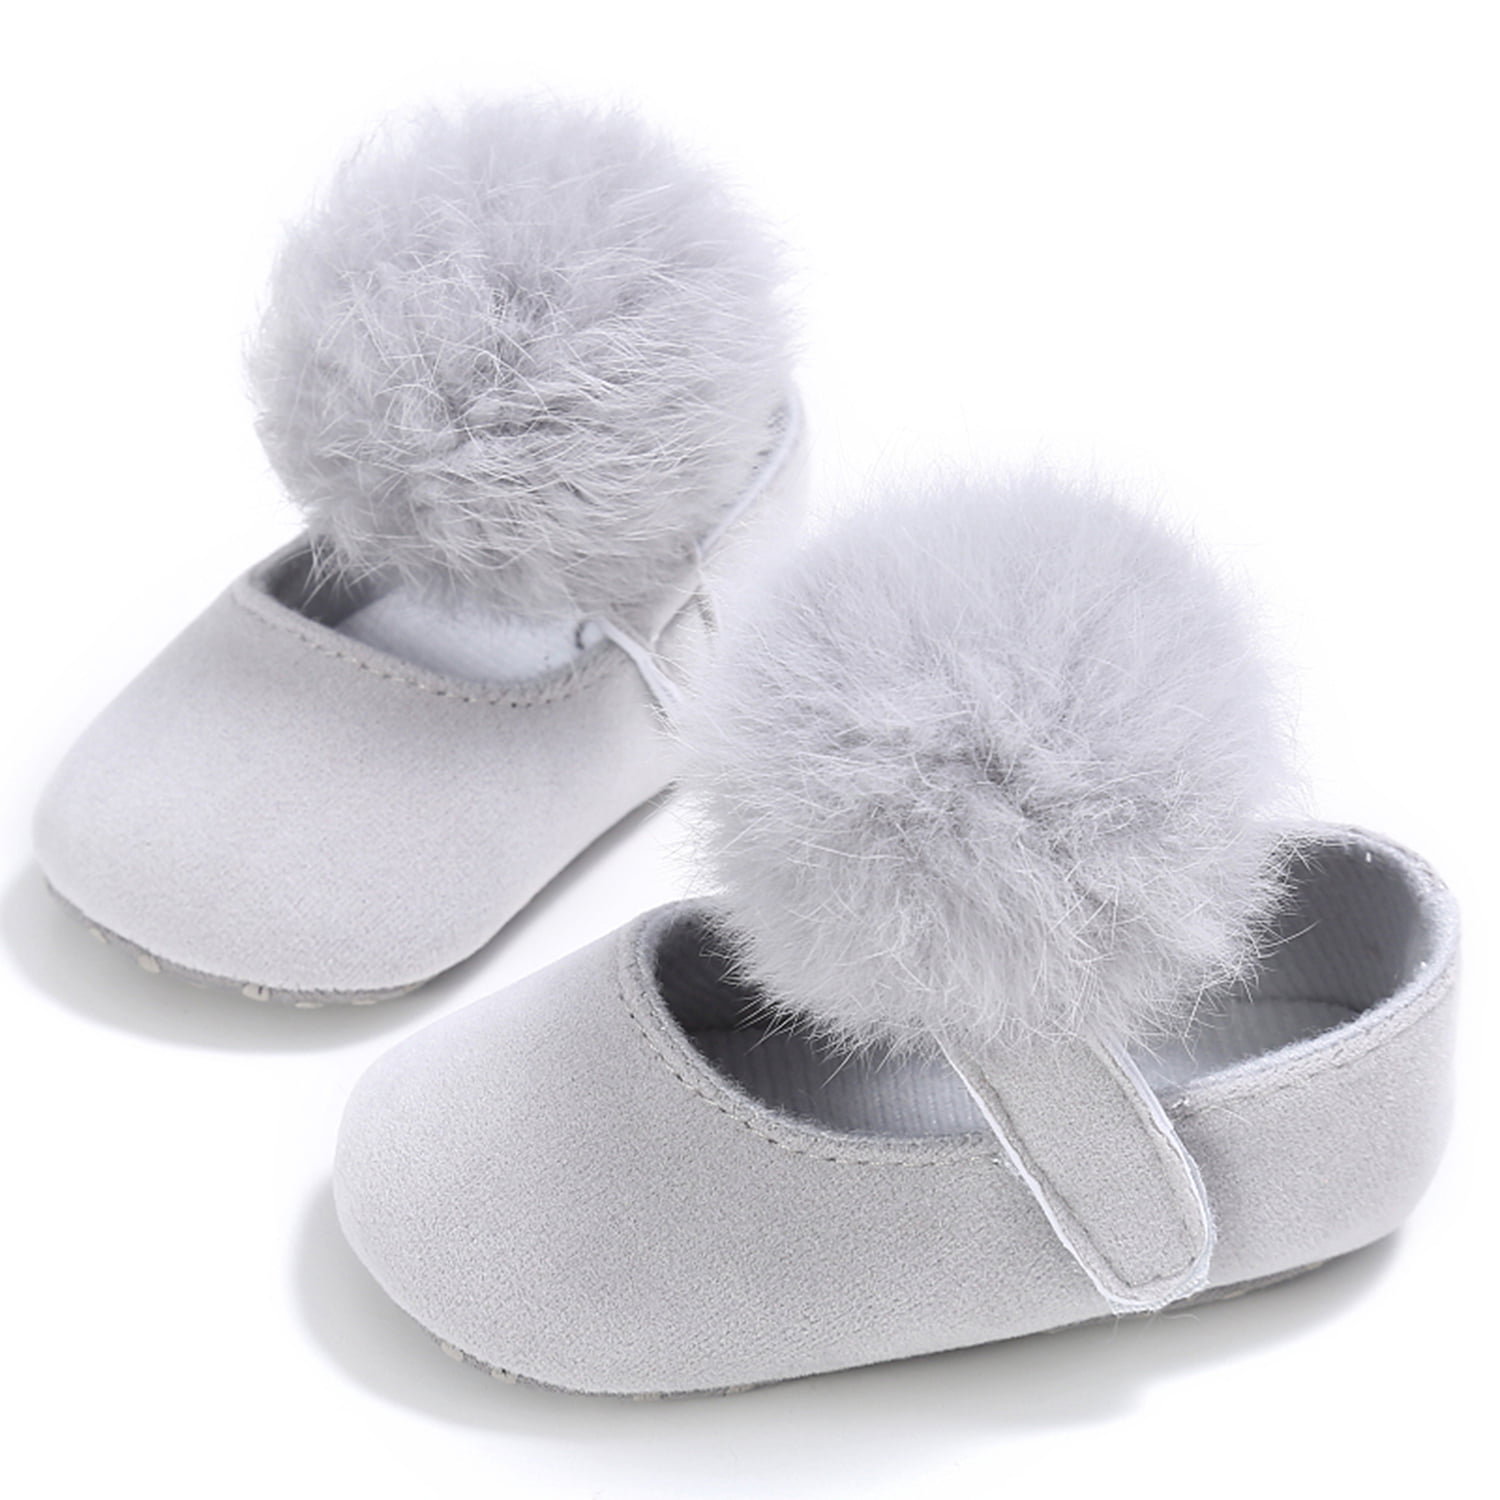 KIDS GIRLS CHILDREN POM POM FLUFFY FUR TRAINERS SNEAKERS PUMPS SHOES UK SIZE 8-2 